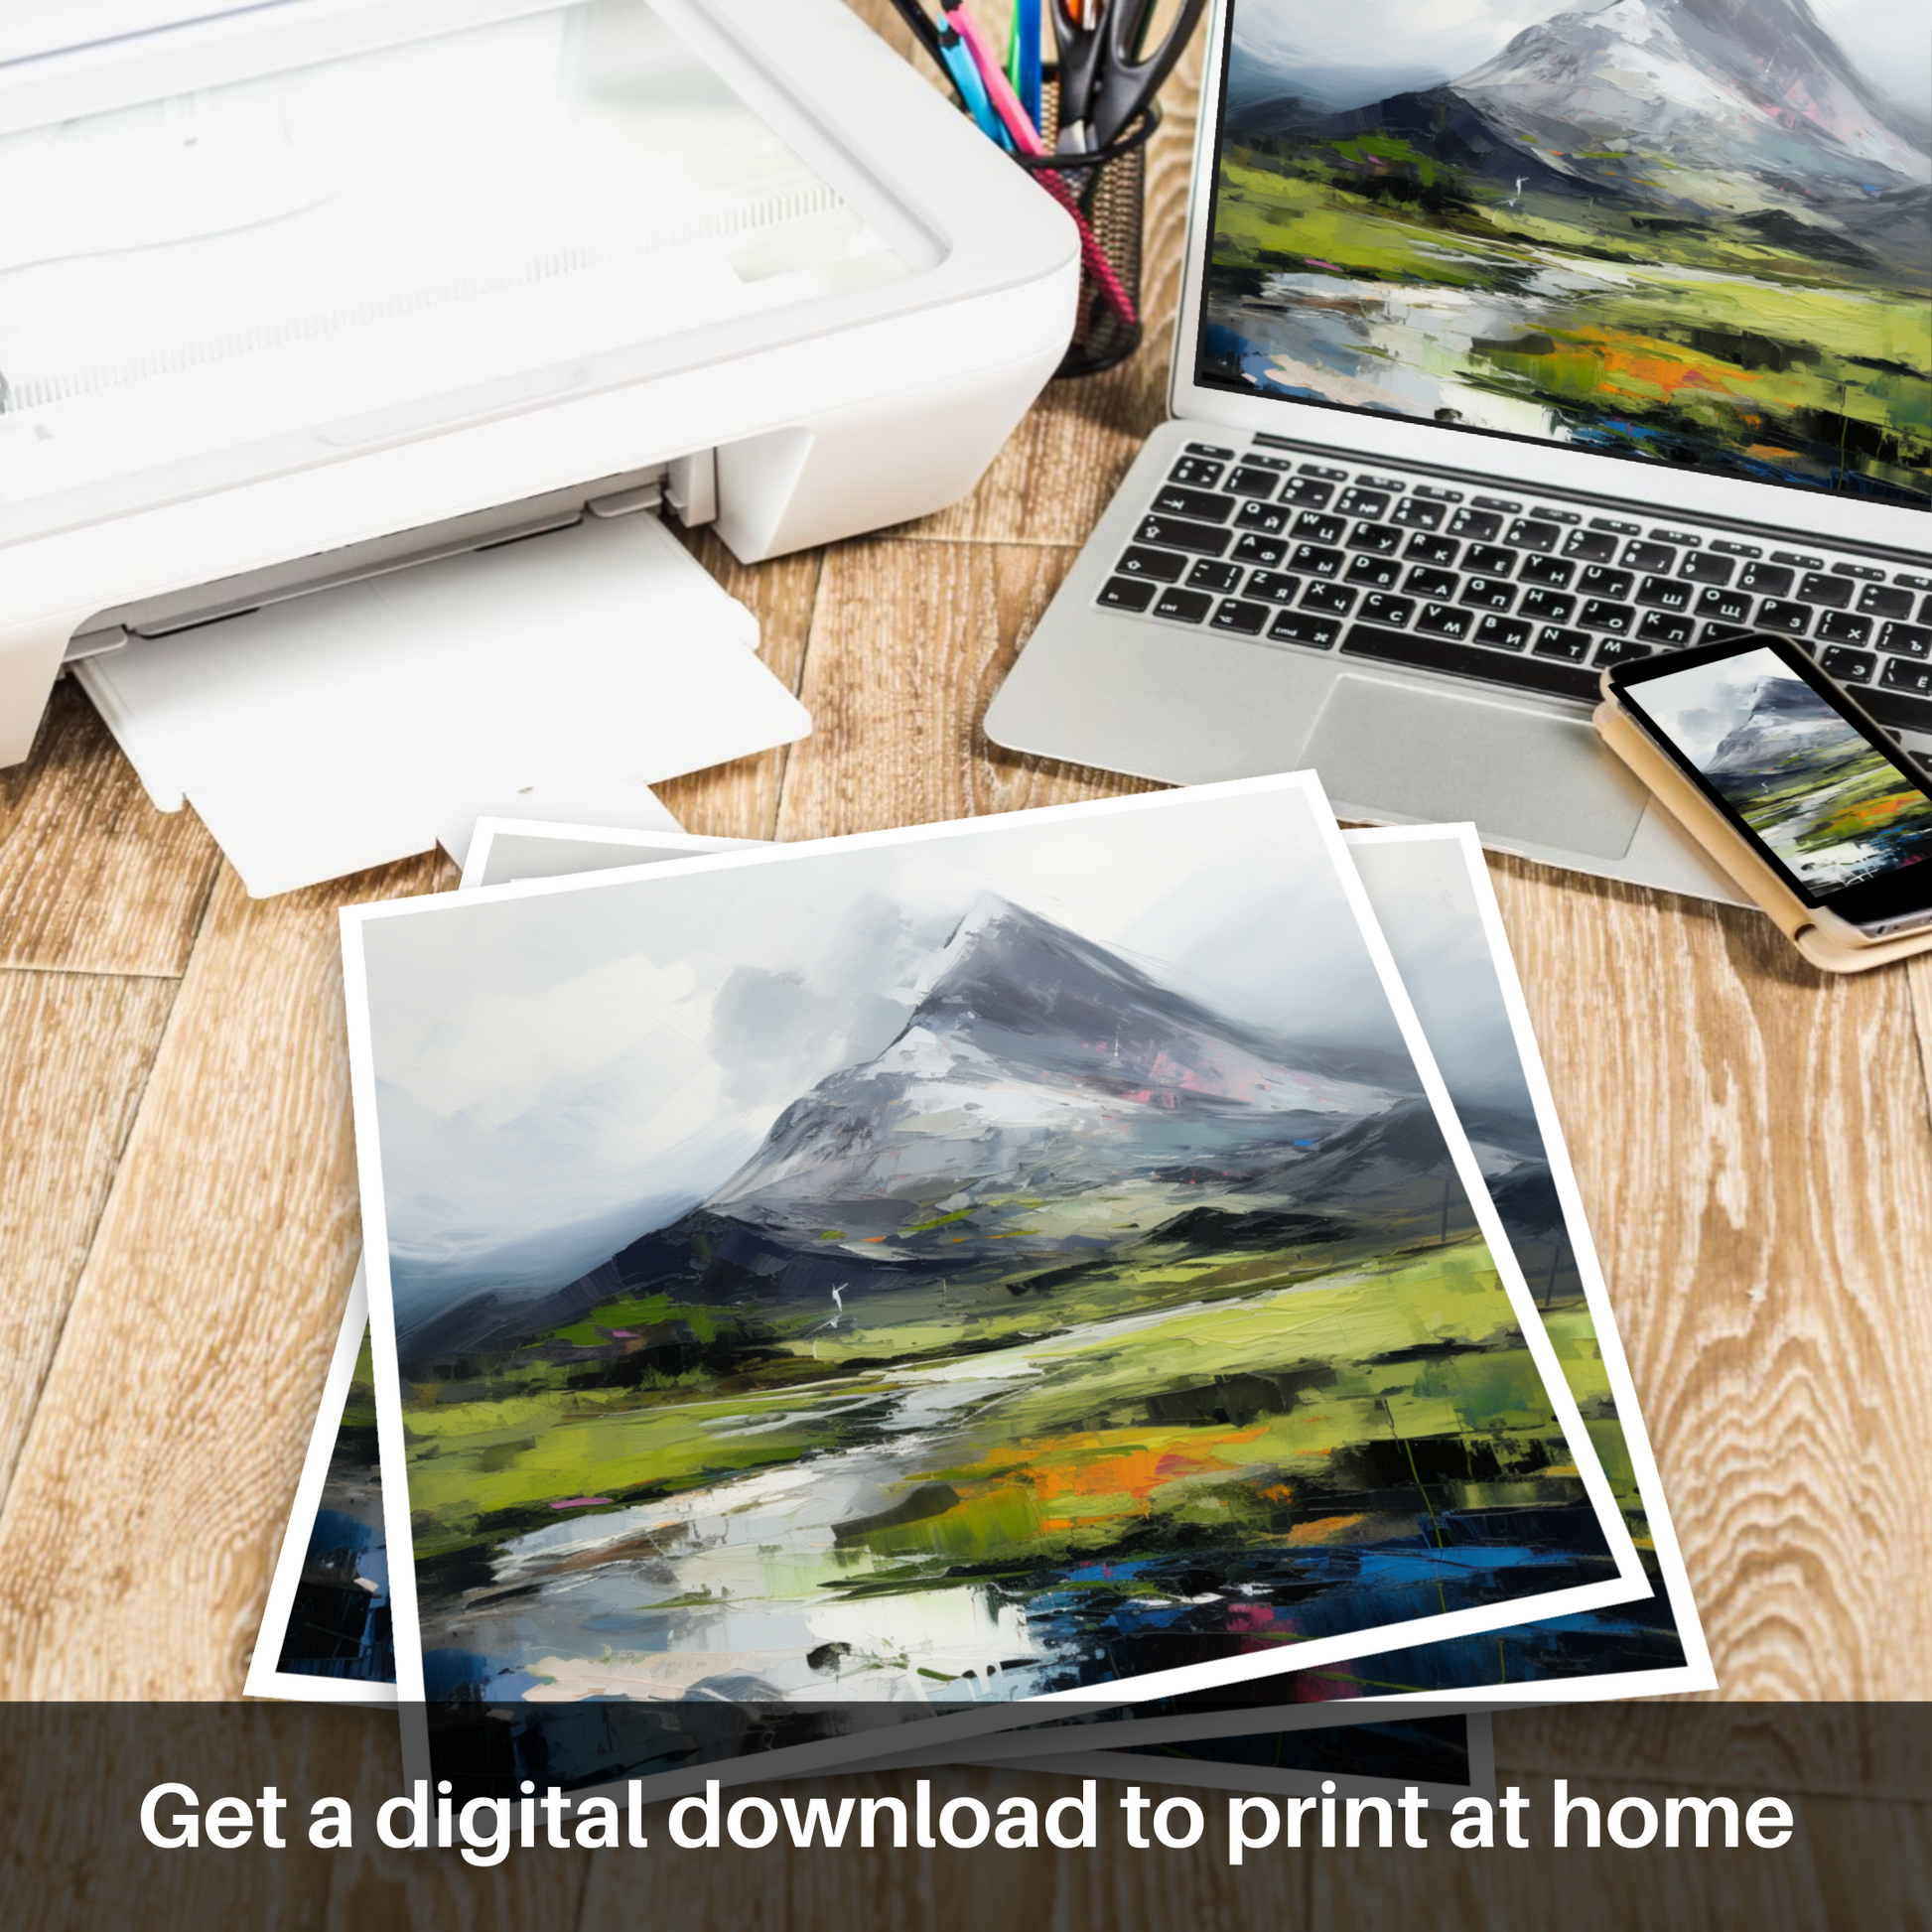 Downloadable and printable picture of Beinn Ghlas